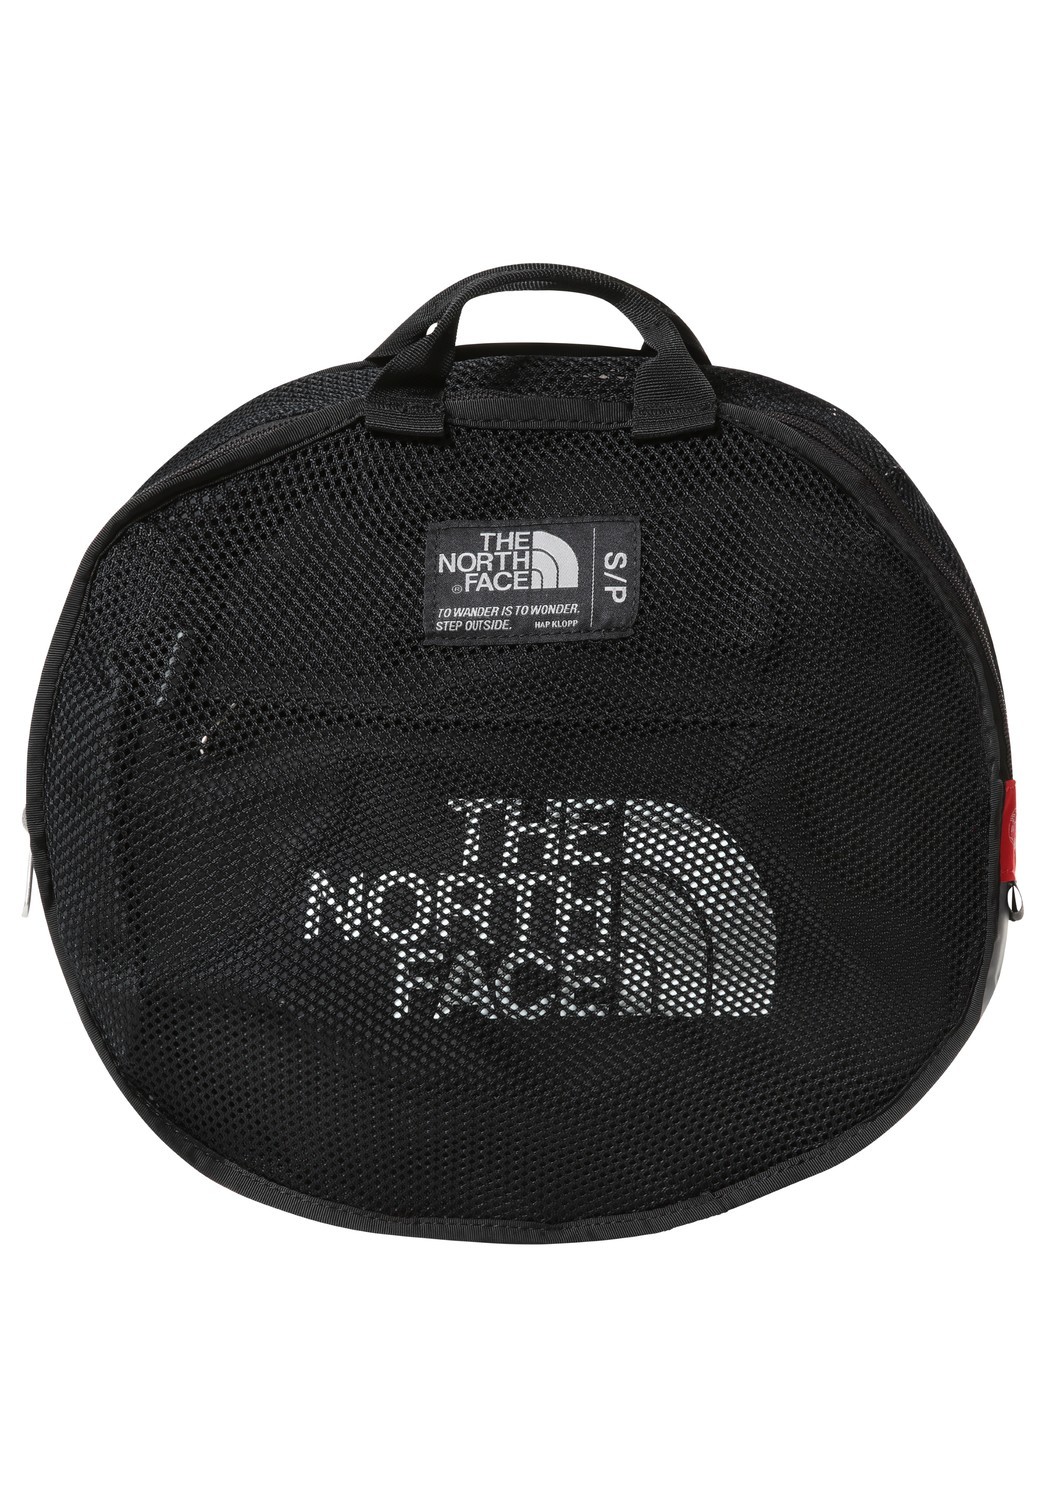 The North Face - Base Camp Duffel S Tnf Black/Tnf White - Bags